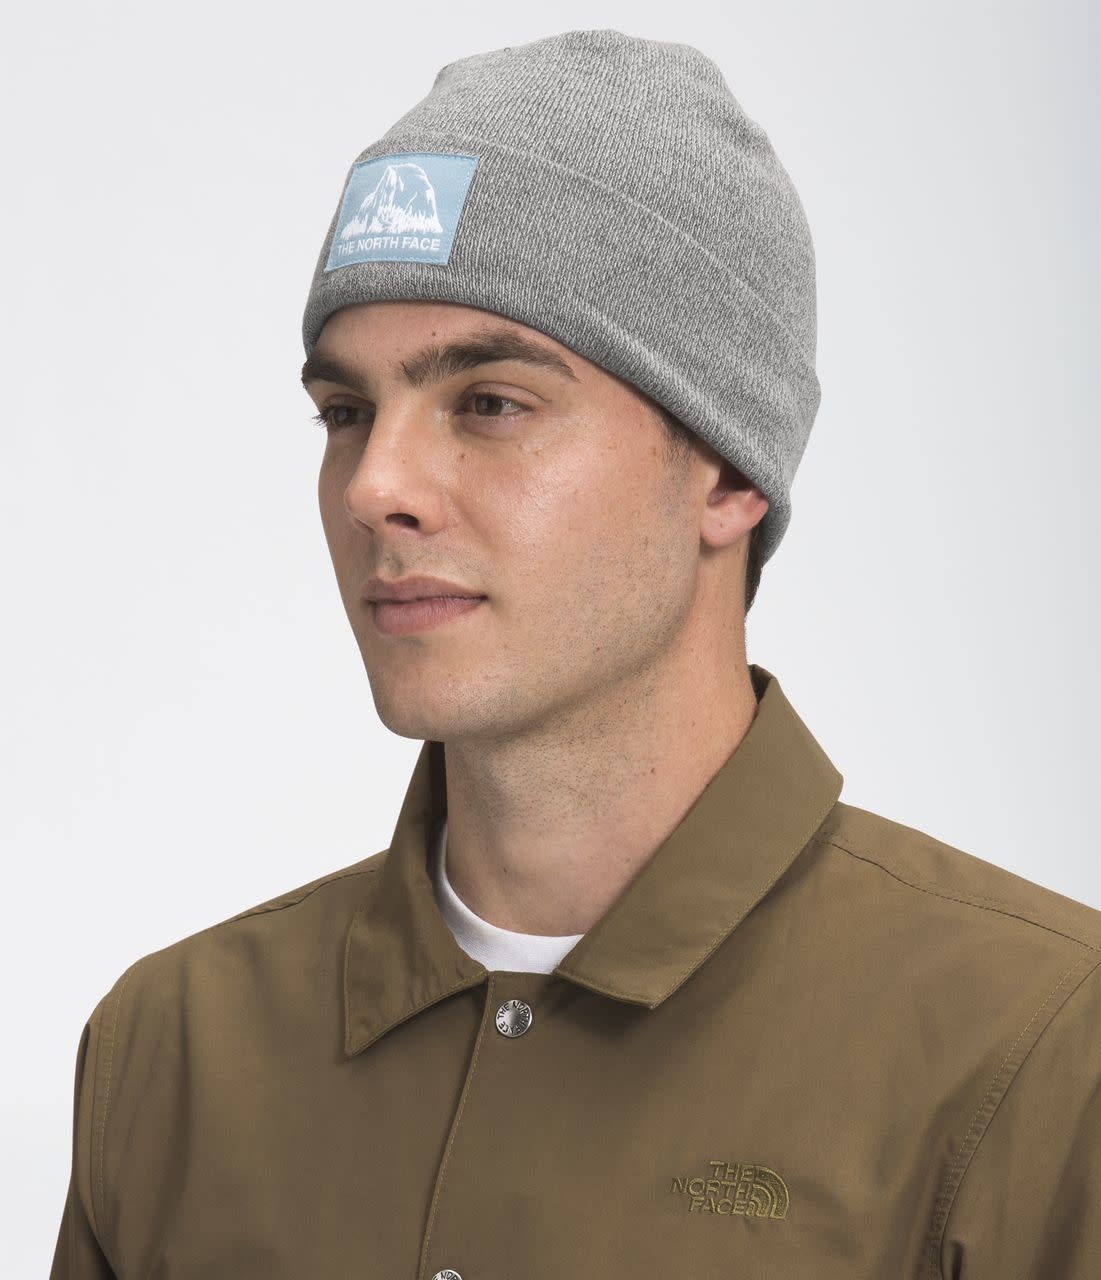 The North Face The North Face Dockworker Recycled Beanie